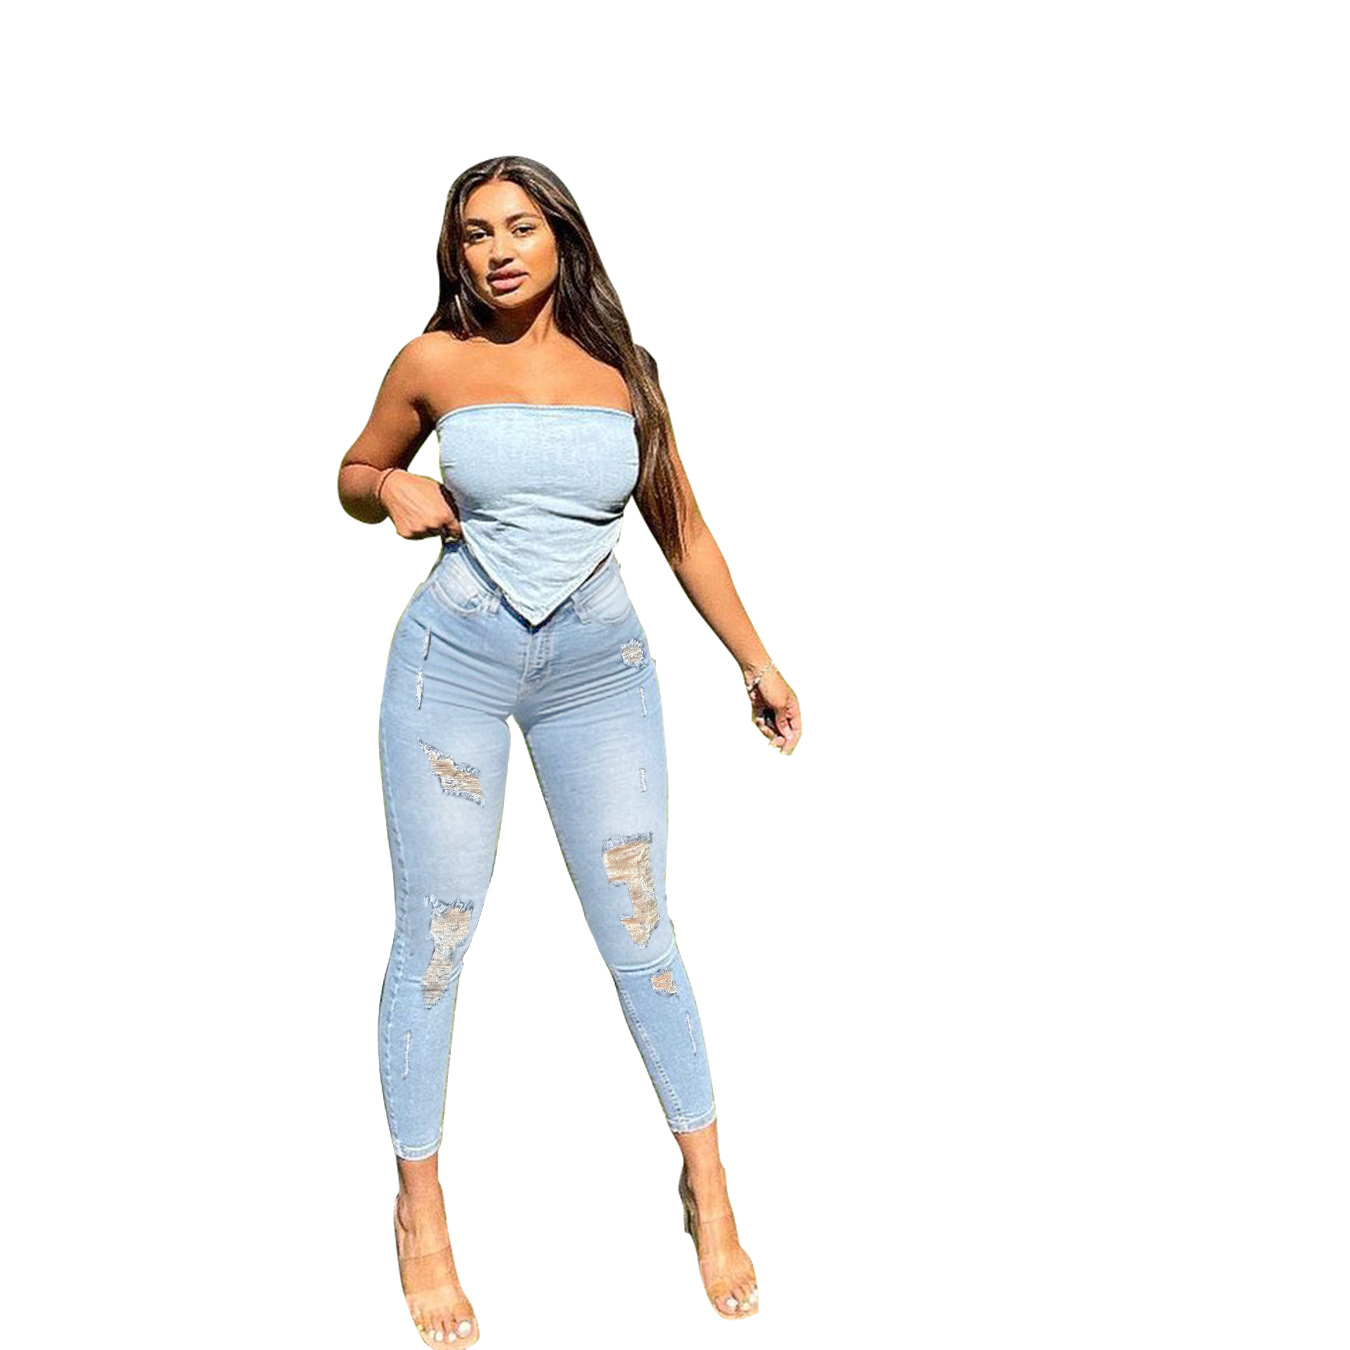 M216 Women's Pants AliExpress Amazon European and American Personalized Ripped Jeans Solid Color High Waist Slim Fit Ankle Tight Trousers